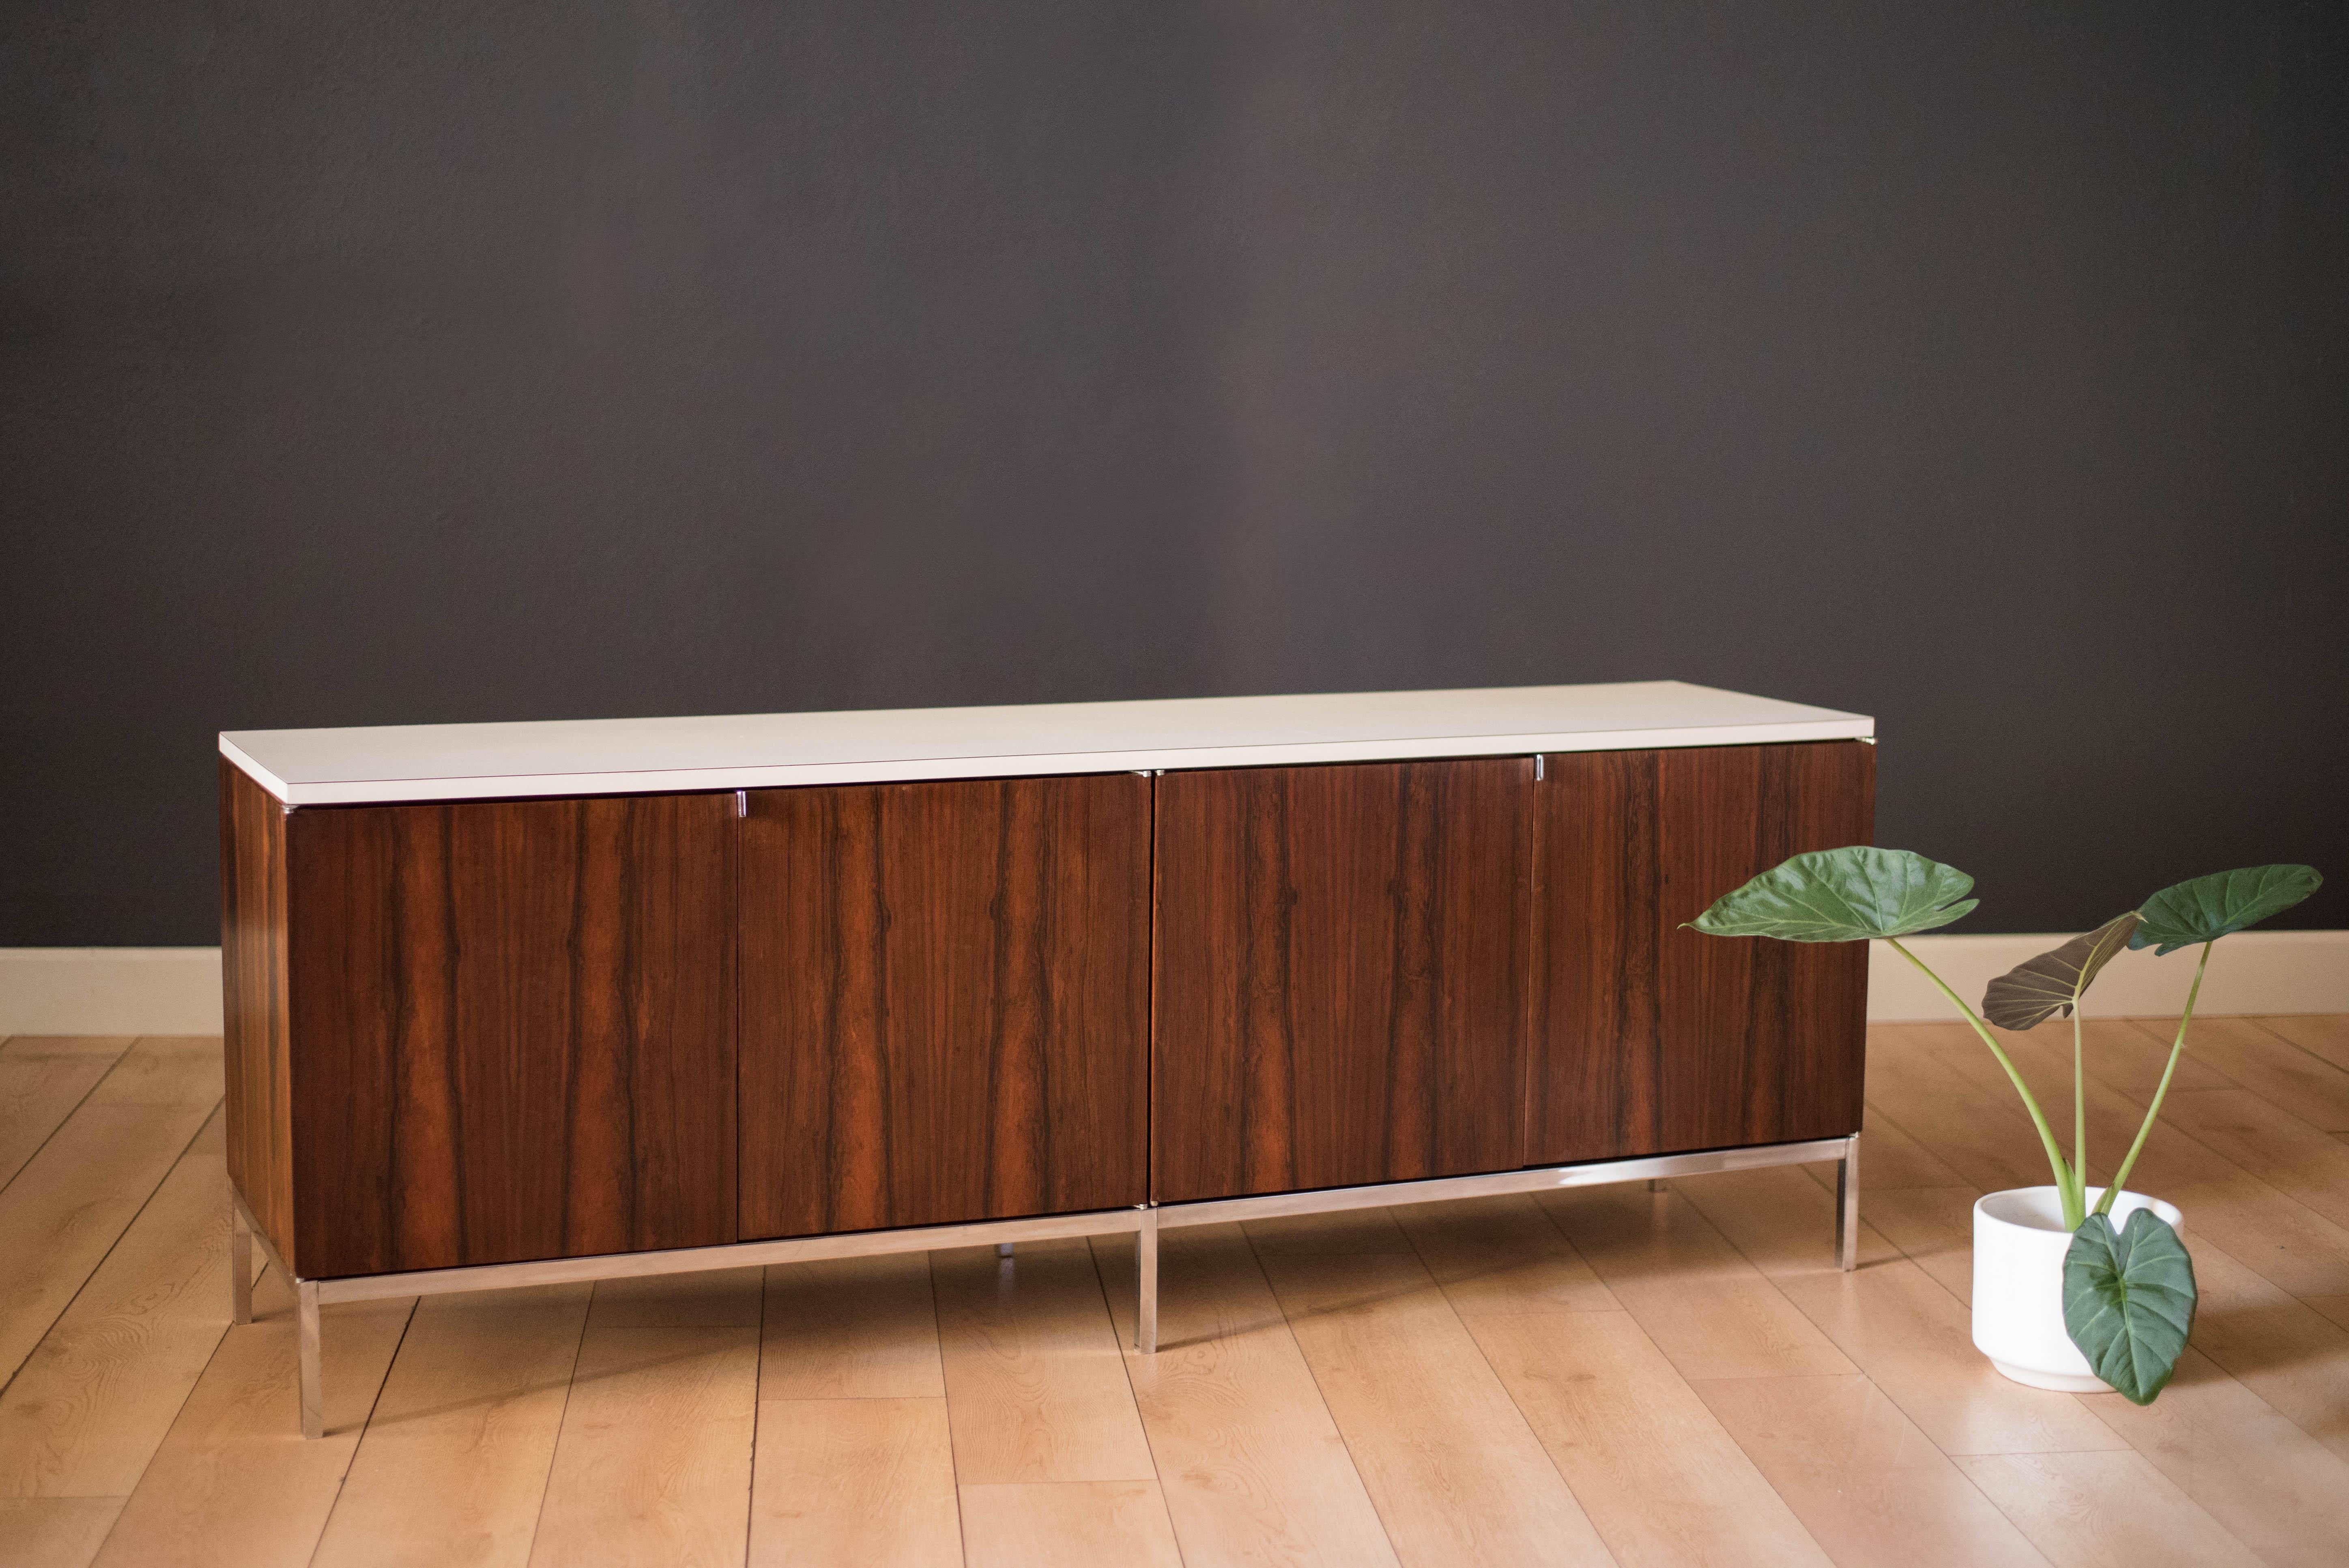 Vintage low credenza or sideboard in rosewood by Florence Knoll, circa 1960s. This piece features the original white laminate top designed for easy maintenance. Includes open cabinet space with adjustable shelving on both sides. Supported by a heavy